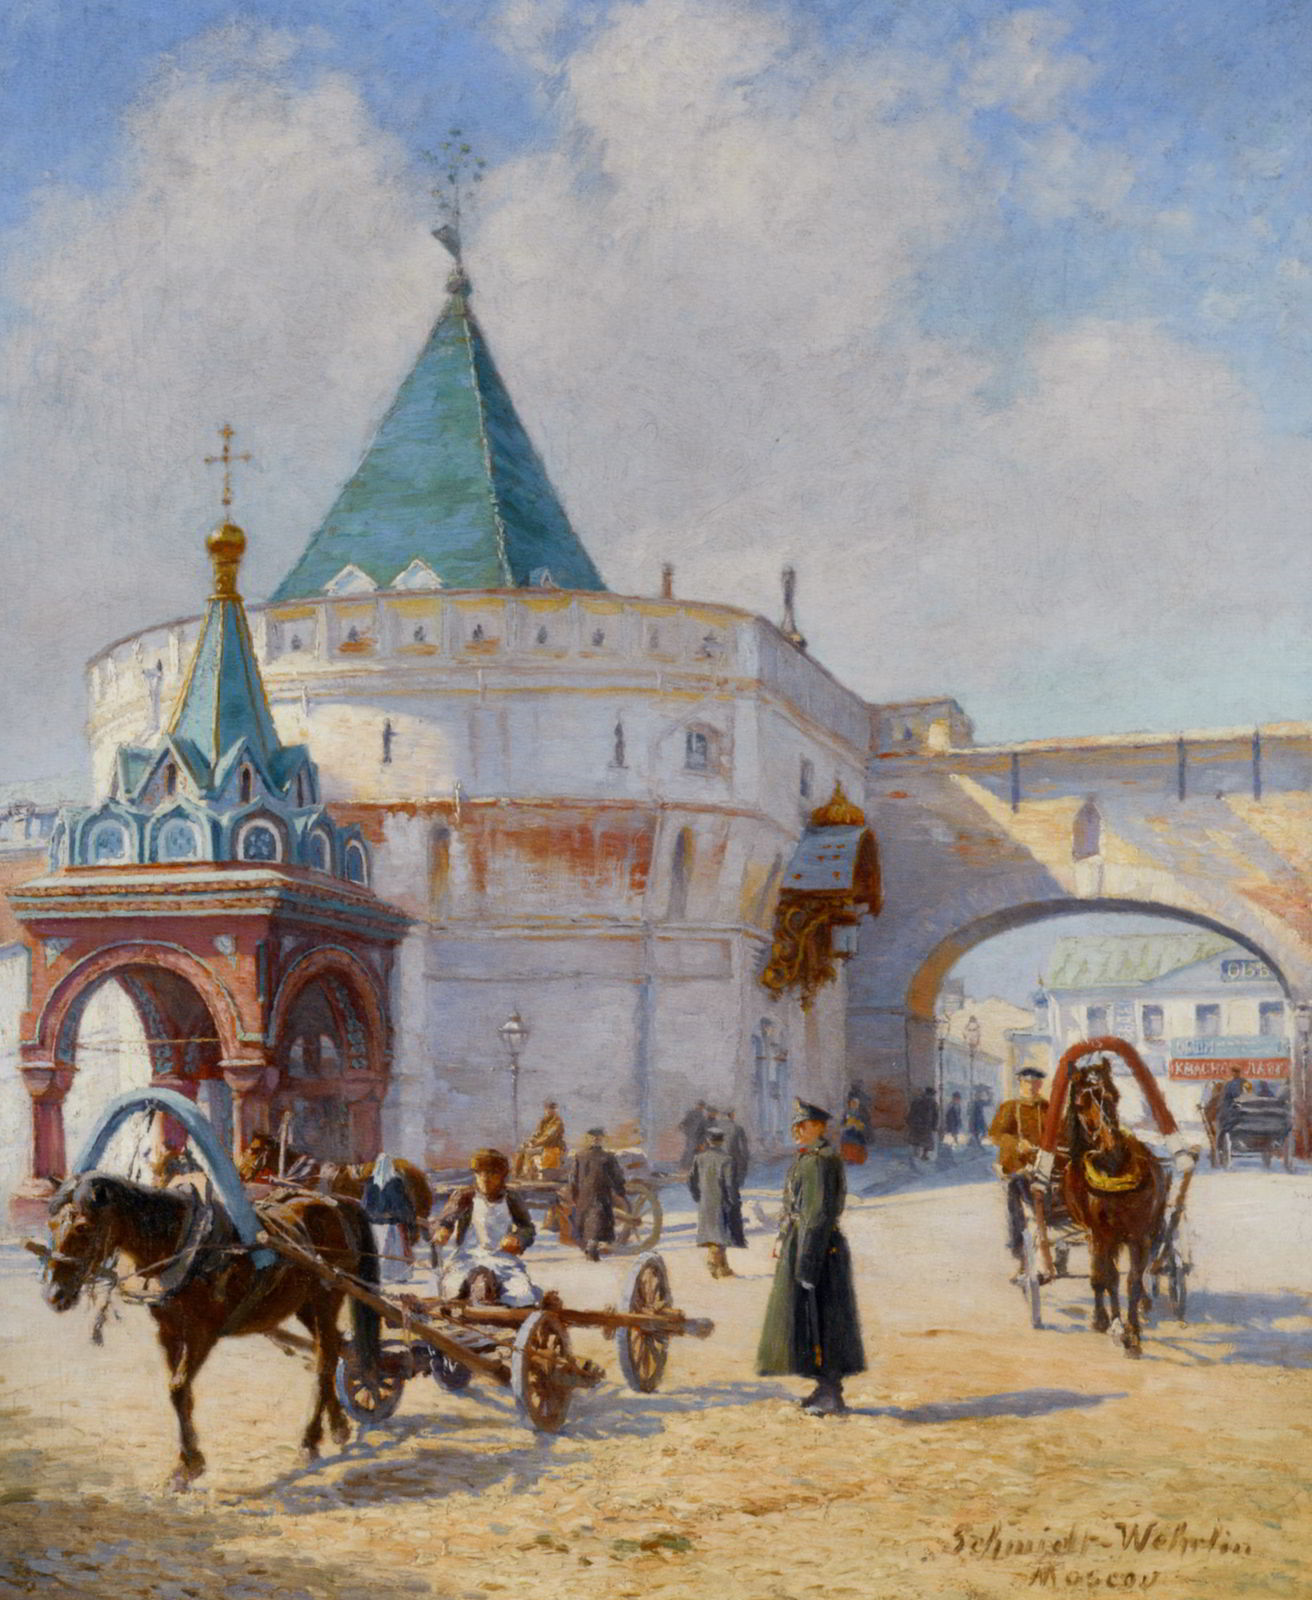 View of Moscow by Emile Schmidt-Wehrlin